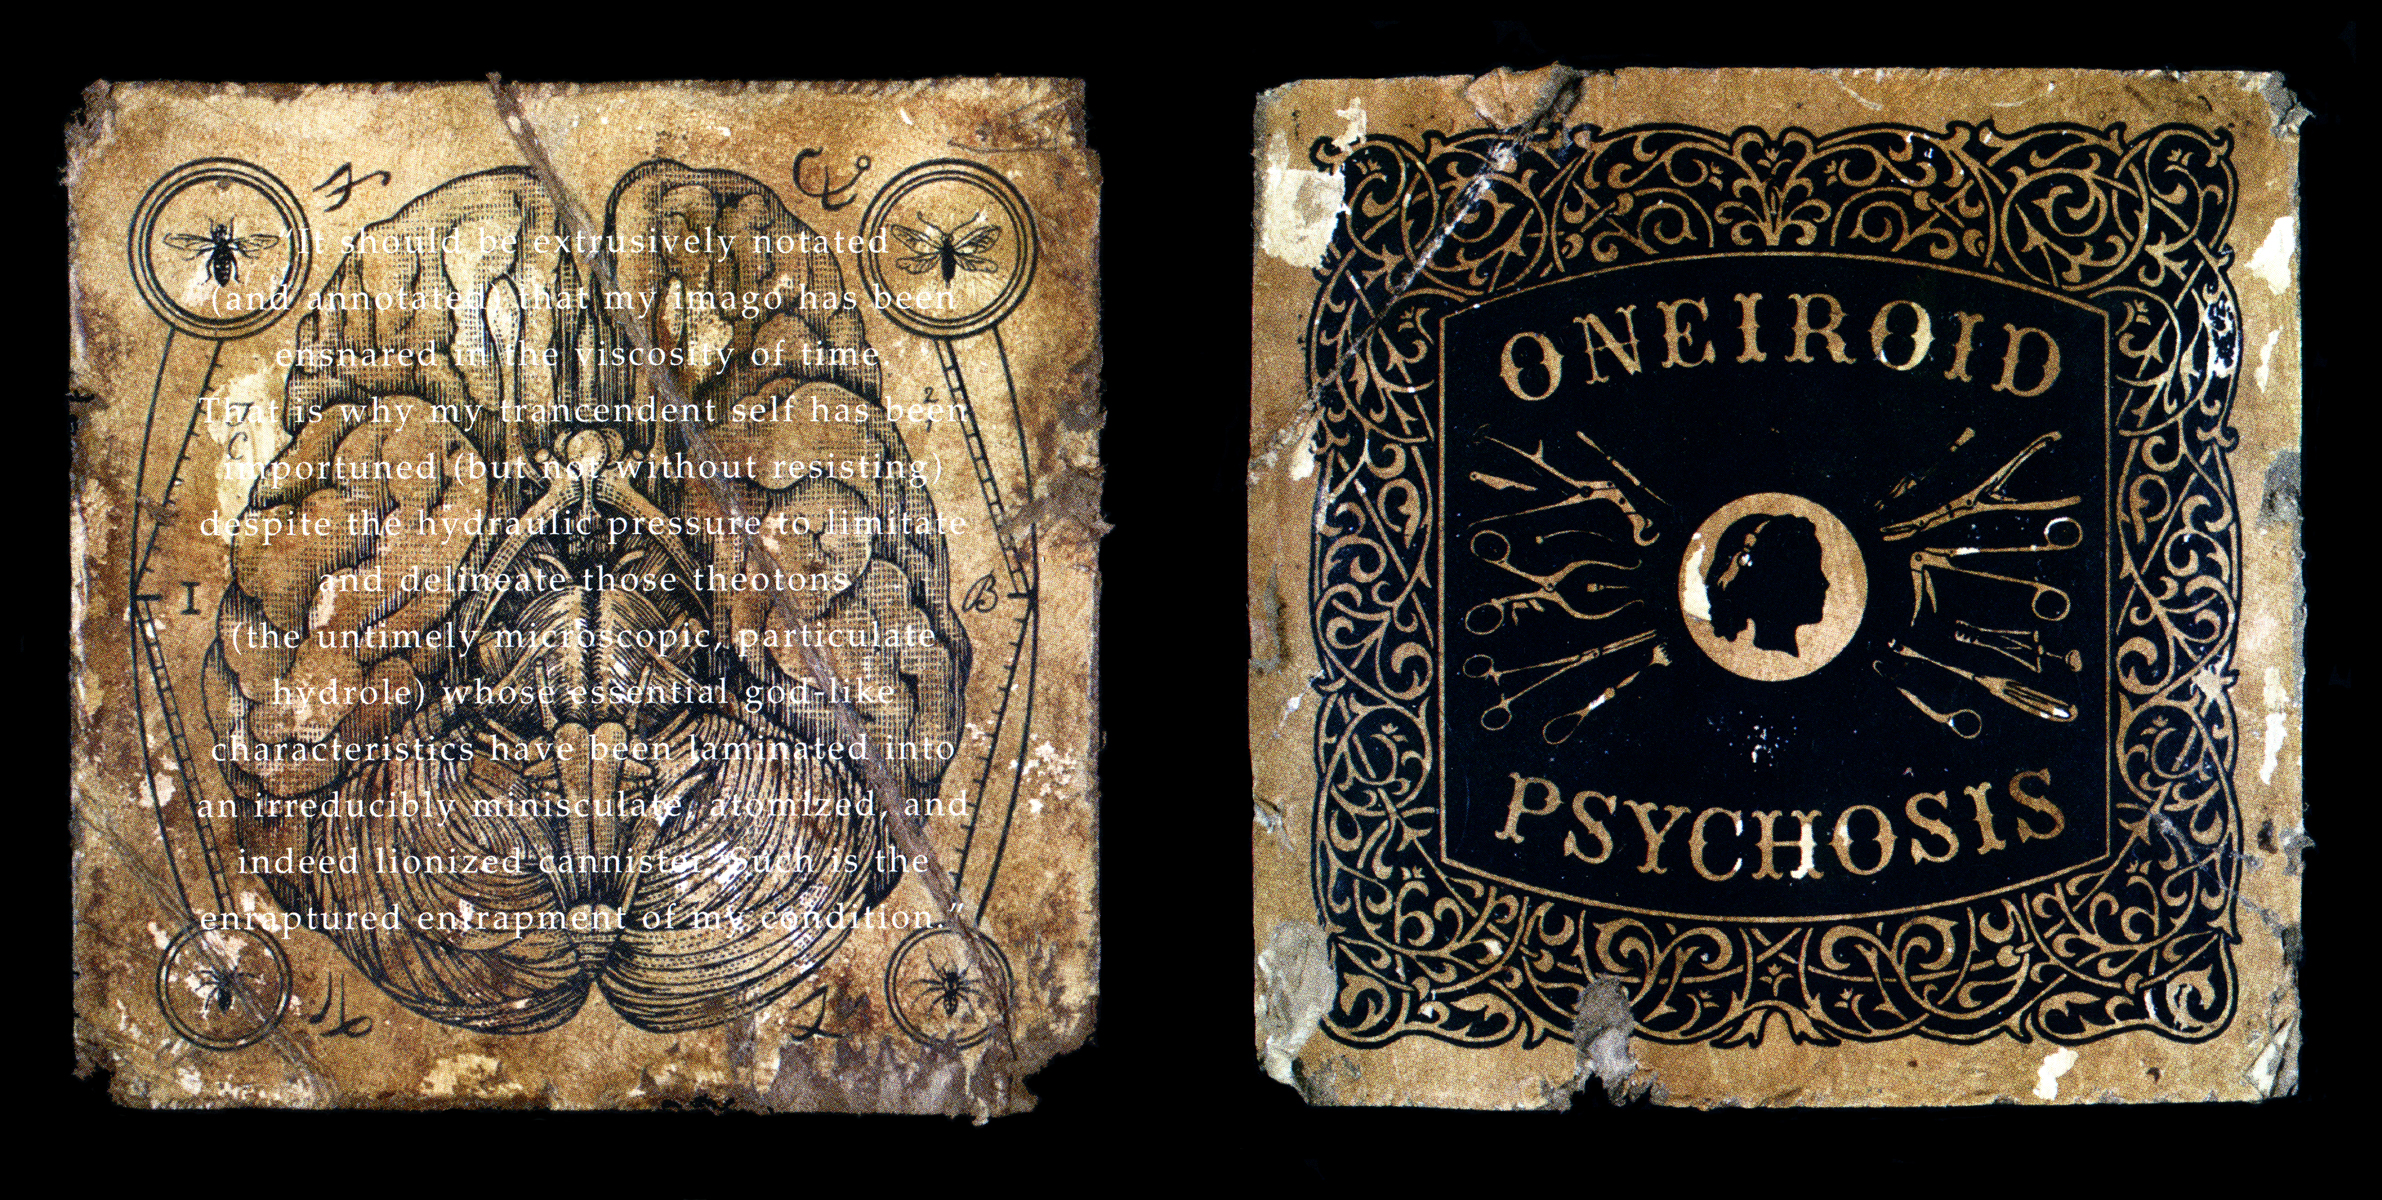   Oneiroid Psychosis,  Fantasies About Illness.  Back and front booklet covers.  1996. Pen and ink, Scratch board, Acrylic. Letterpress printed on board. Released by Decibel Records. 